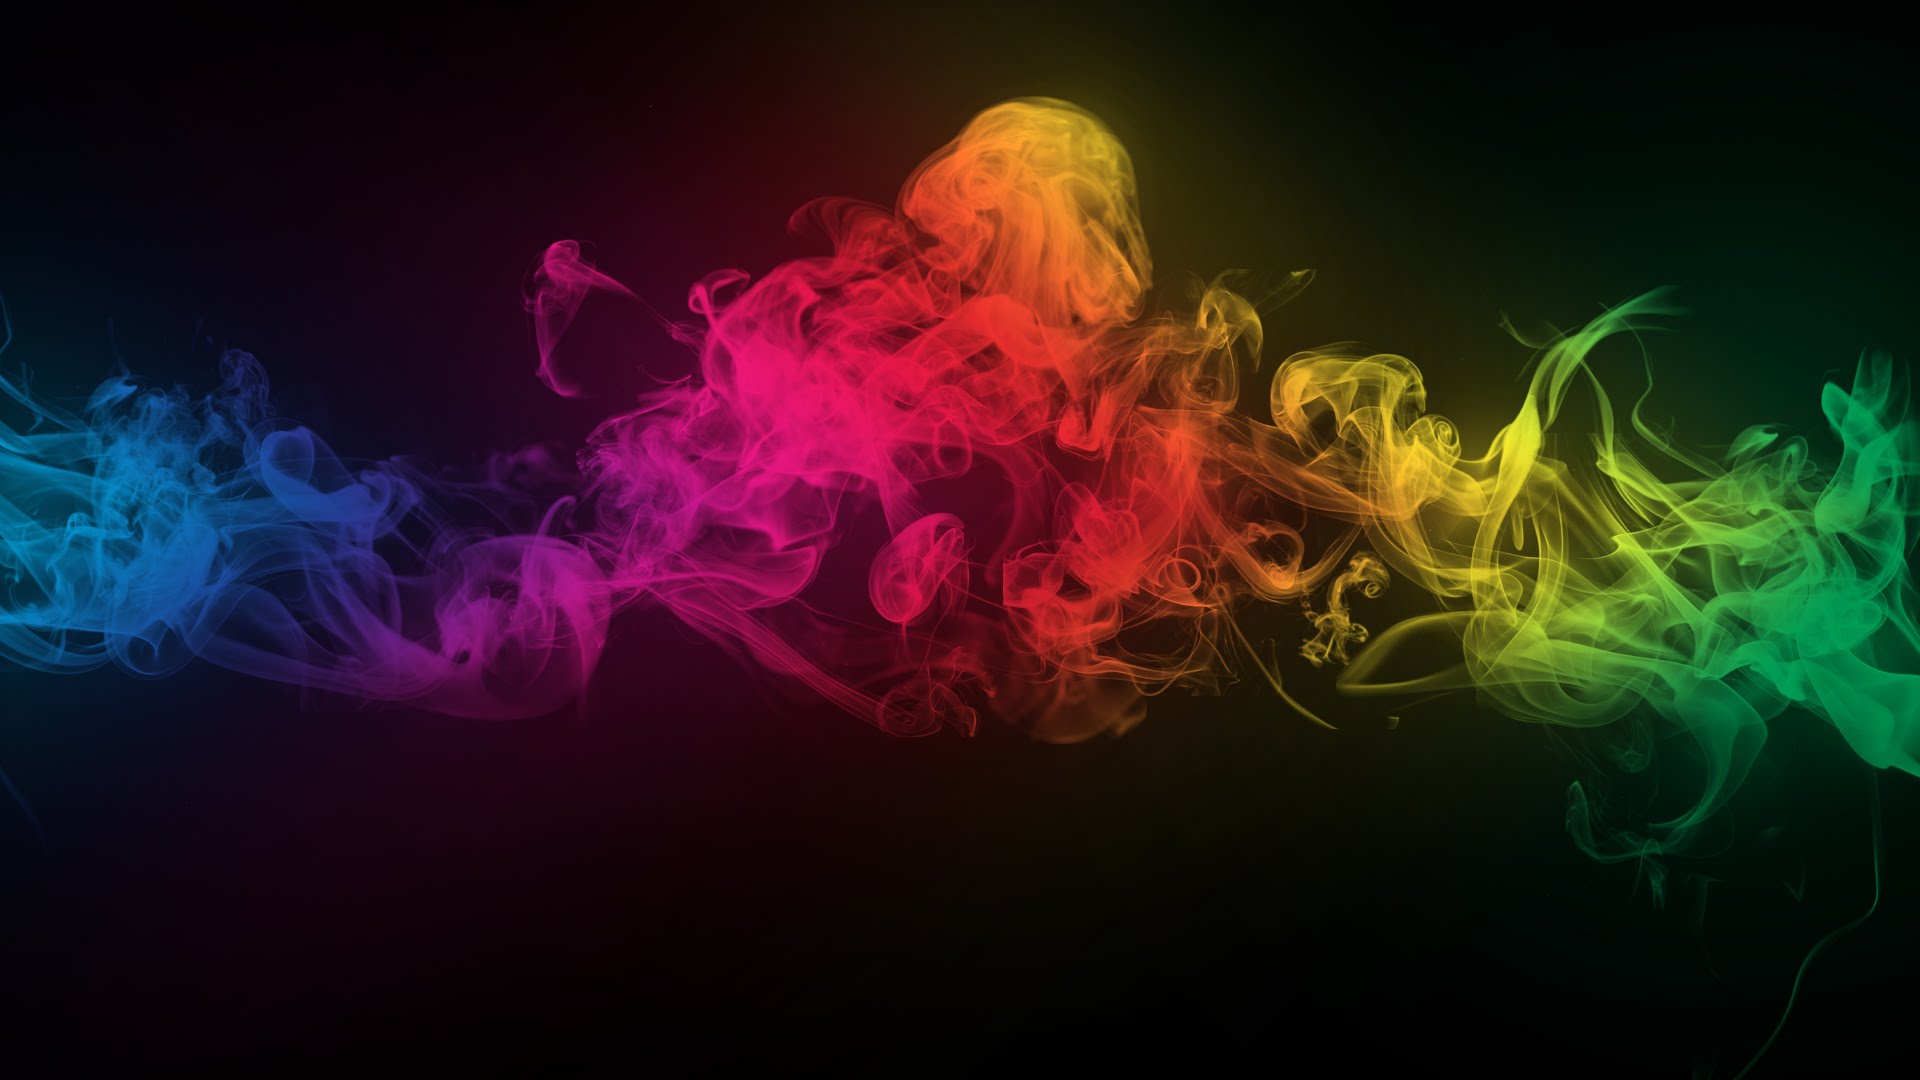 How to make COLORED smoke Wallpaper with Photoshop CC - YouTube